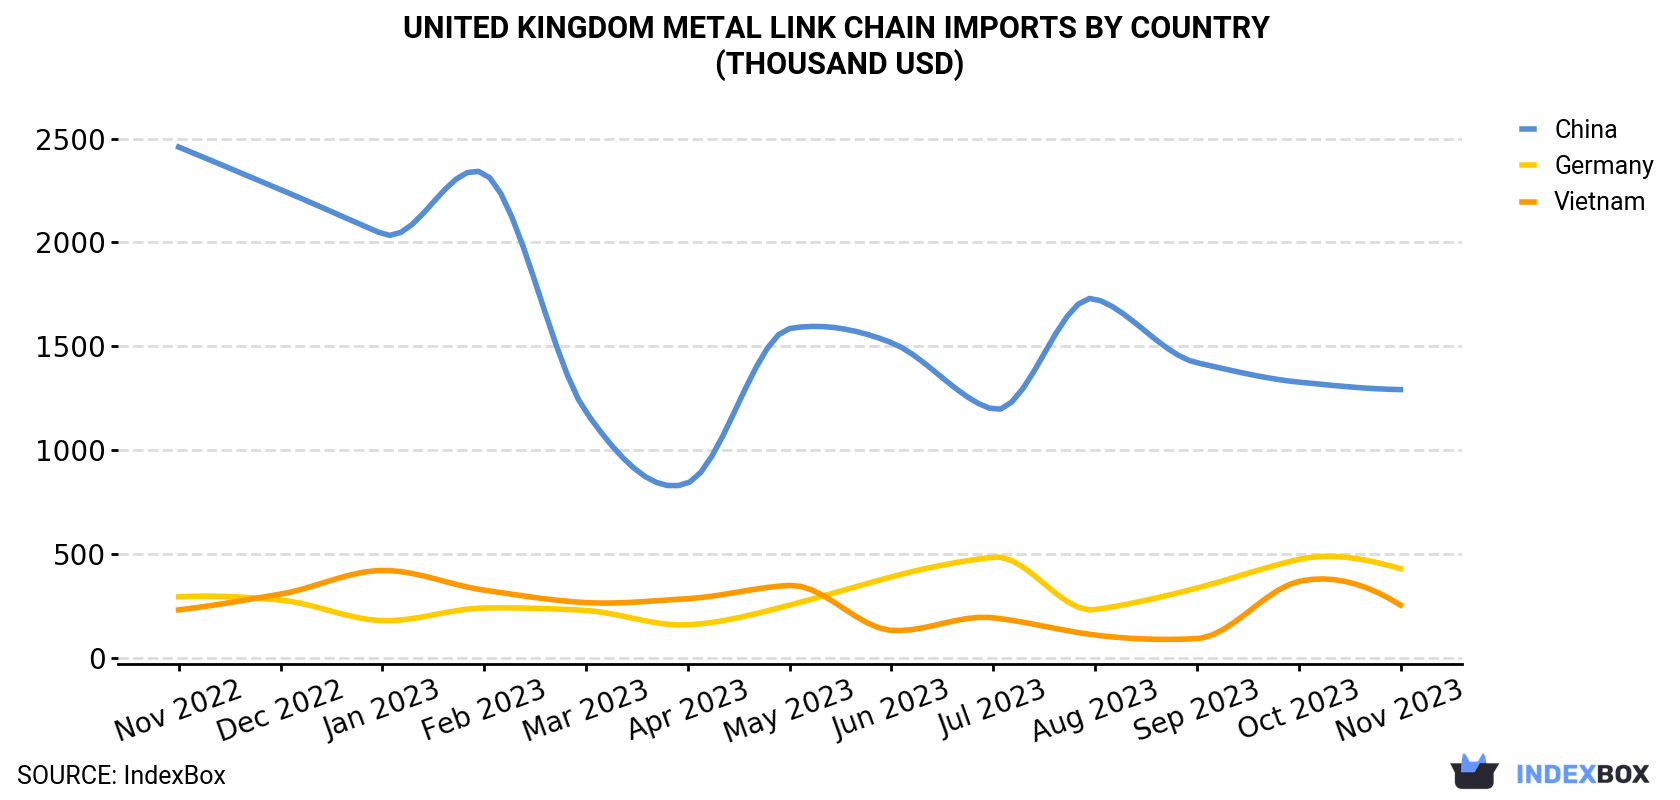 United Kingdom Metal Link Chain Imports By Country (Thousand USD)